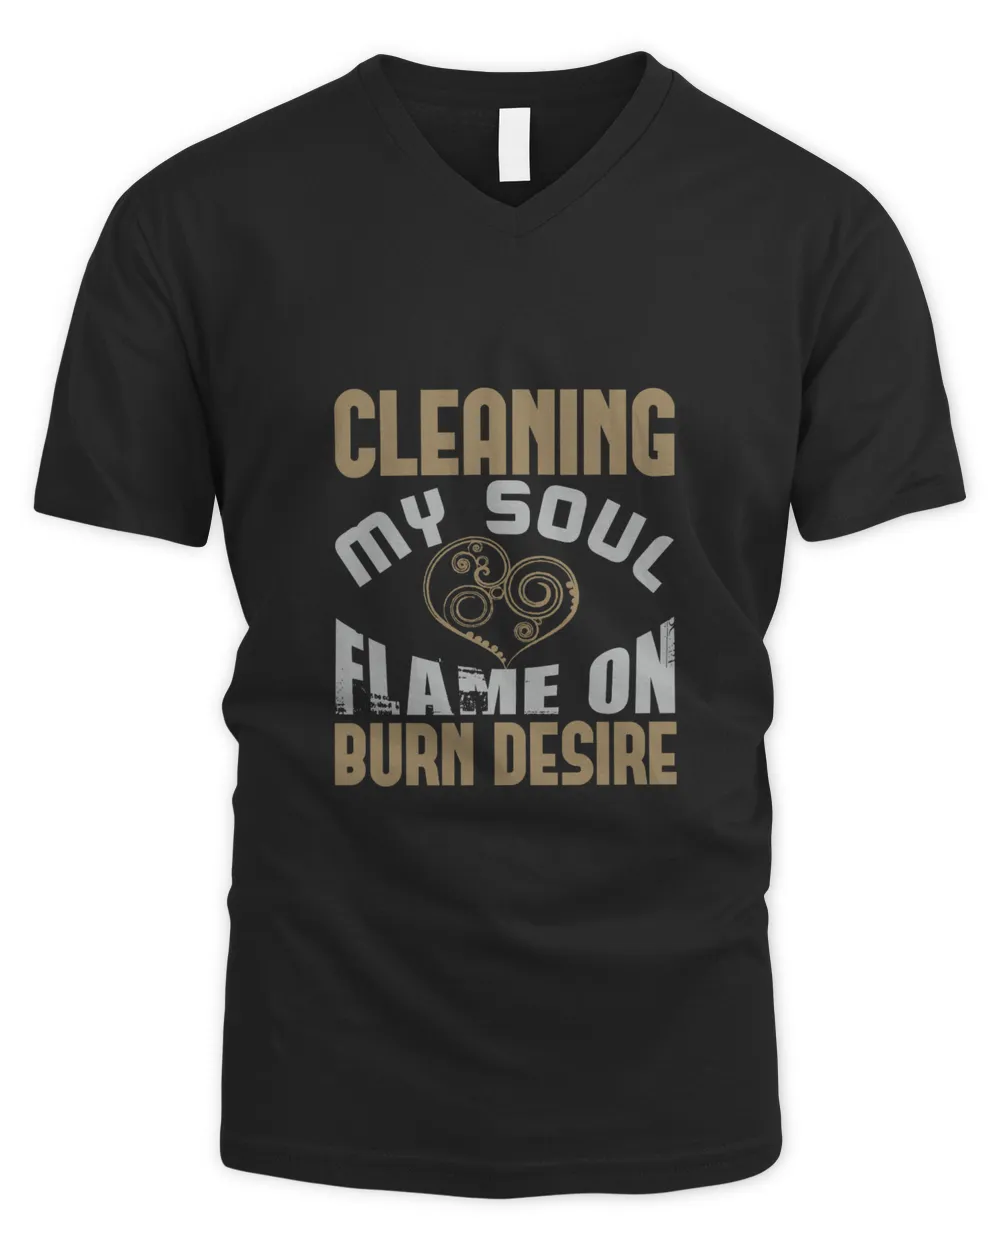 Cleaning My Soul. Flame On Burn Desiree, Cleaner Shirt, Cleaner Gifts, Cleaner, Cleaner Tshirt, Funny Gift For Cleaner